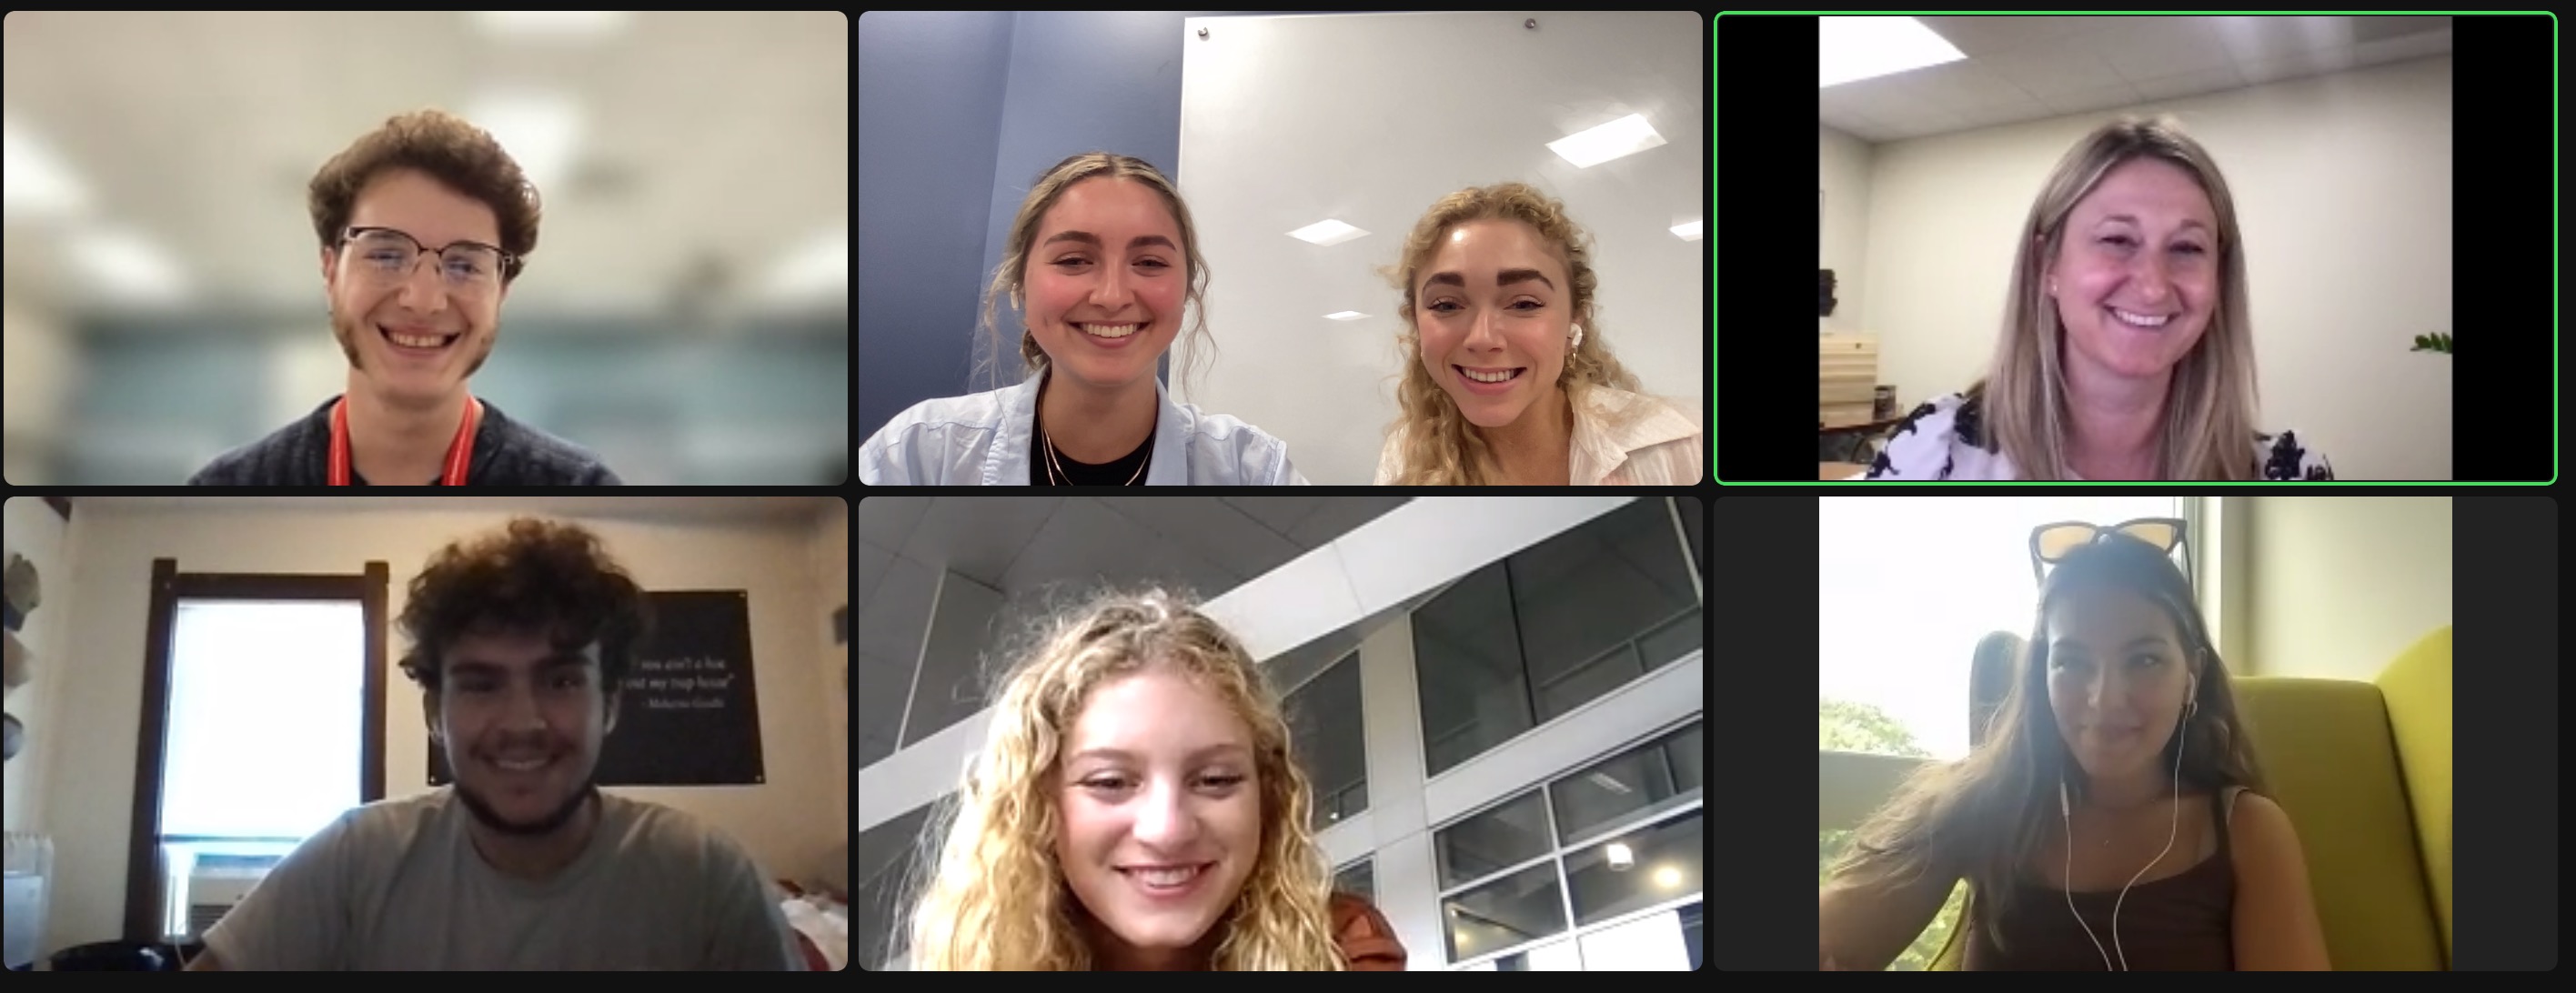 The team’s first meeting with the client! Top row, left-to-right: Mr. Ken Gregg, Margo Amatuzio, Gracie Kreissler, Dr. Carri Glide-Hurst. Bottom row, left-to-right: Cameron Owens, Isabella Crane, Ava Lanczy. (Not pictured: Jimmy Barlow, Mr. Andy Siedschlag)